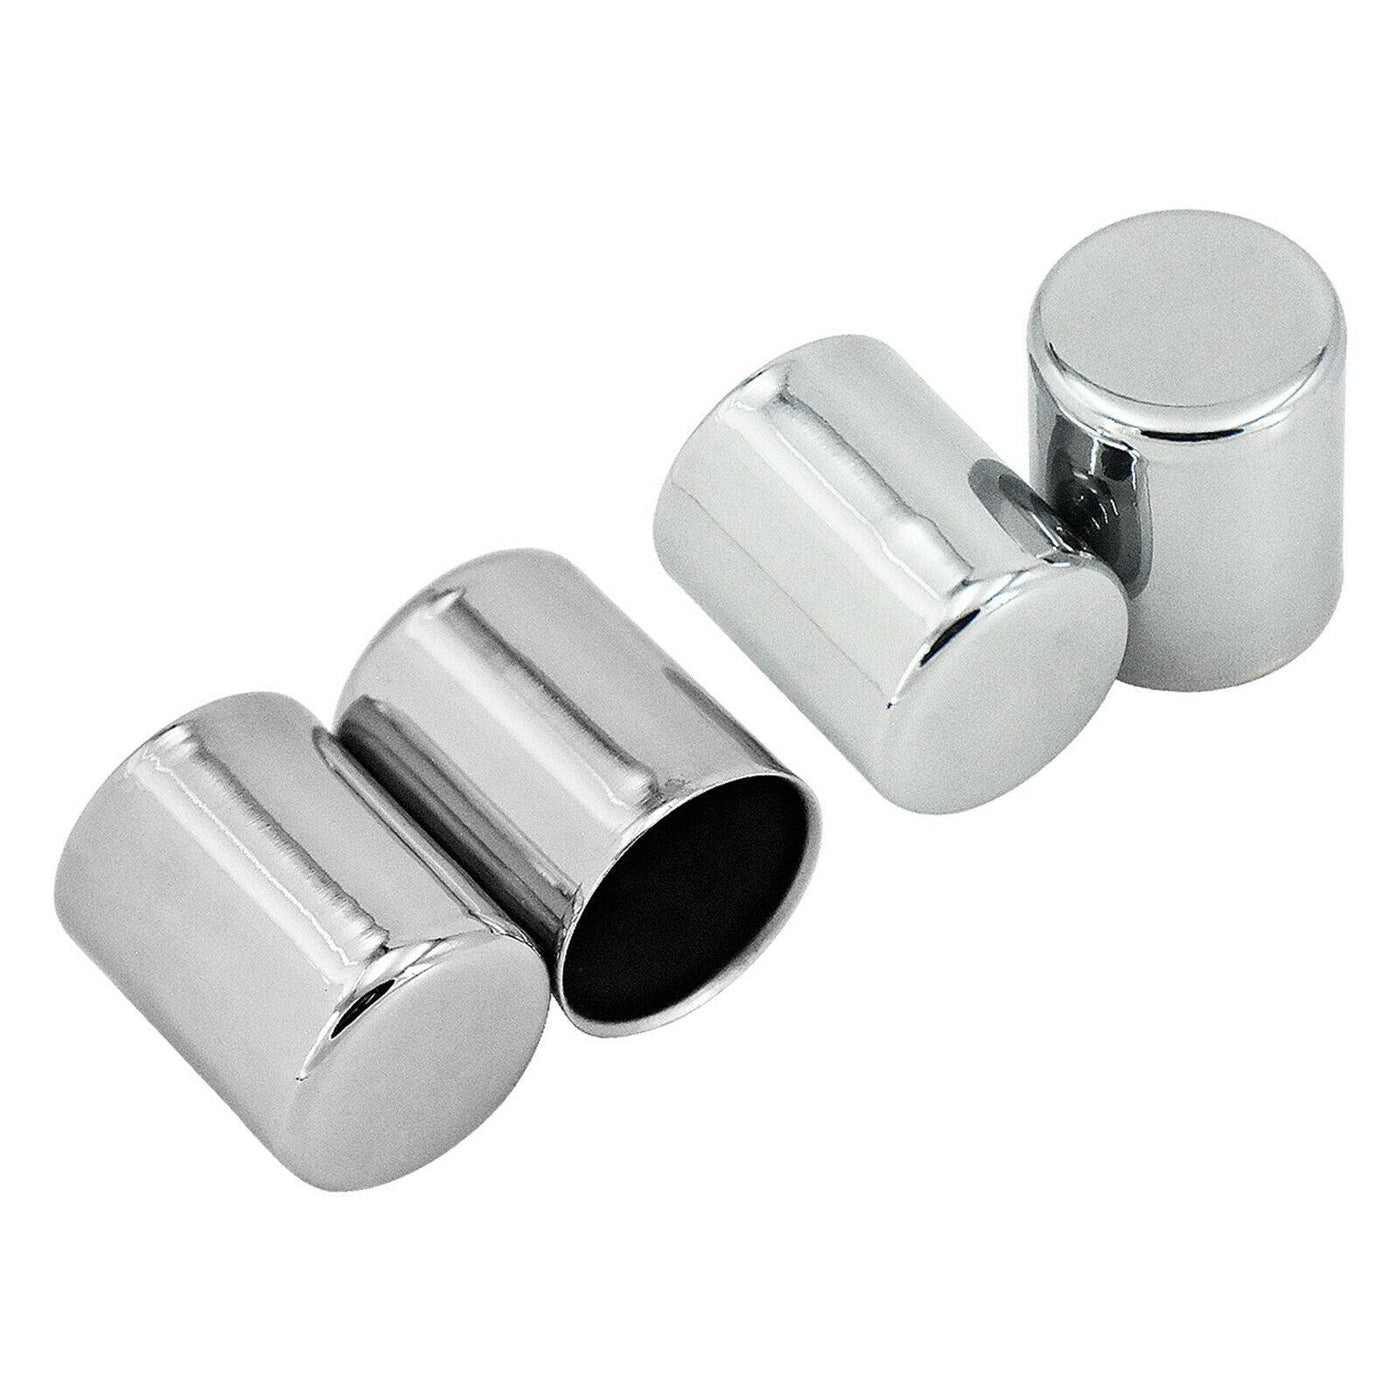 4x Chrome Docking Hardware Point Magnet Cover Cap Fit For Harley Touring Softail - Moto Life Products